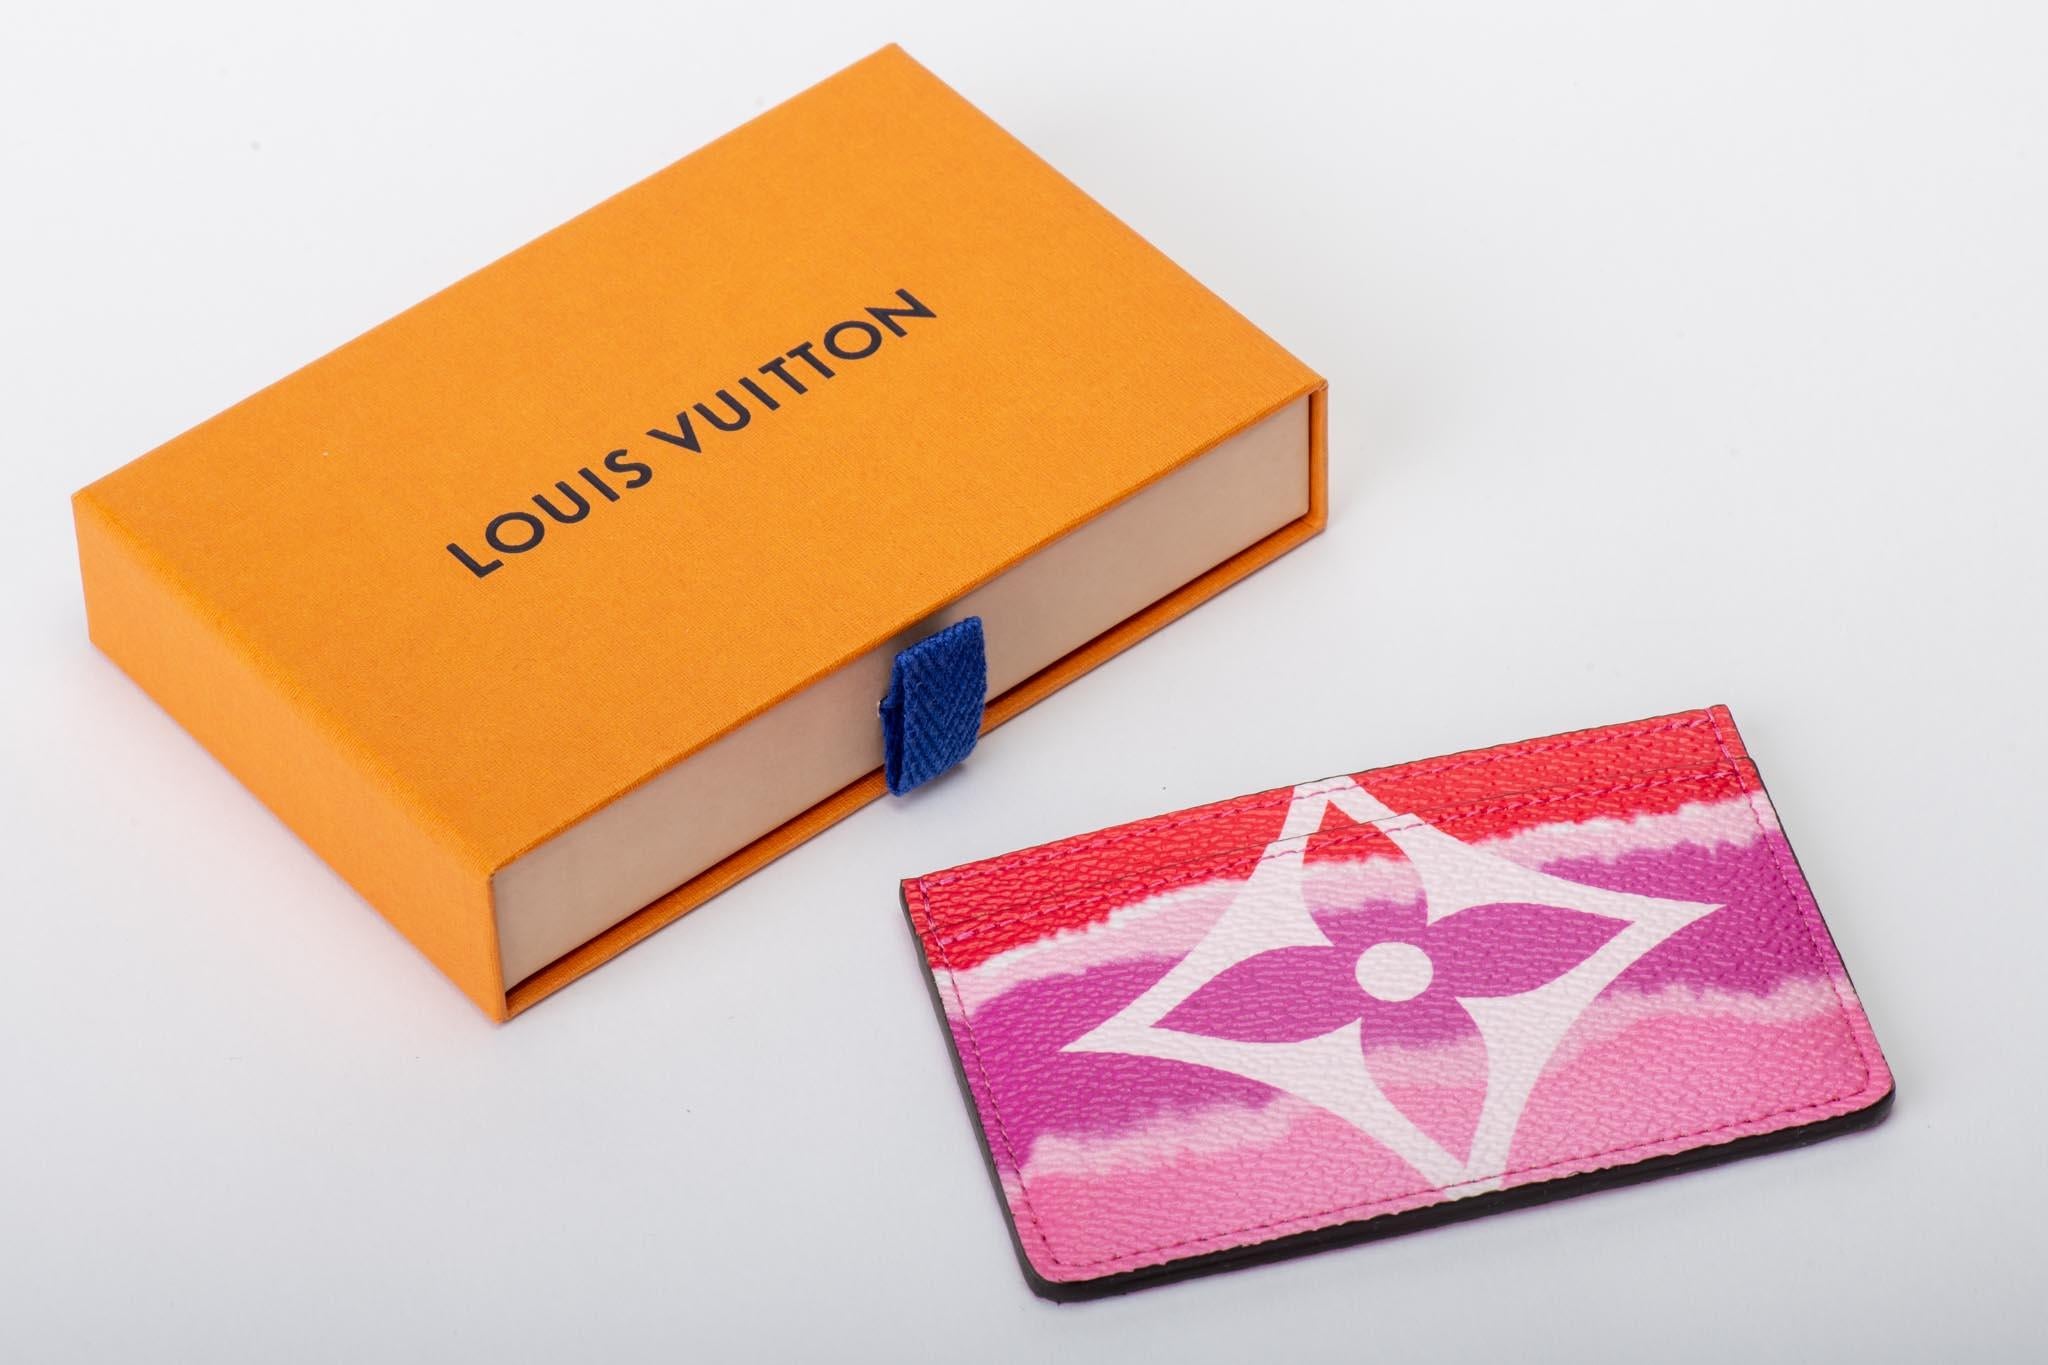 Louis Vuitton limited edition escale red and lilac credit card case. Brand new in original box.